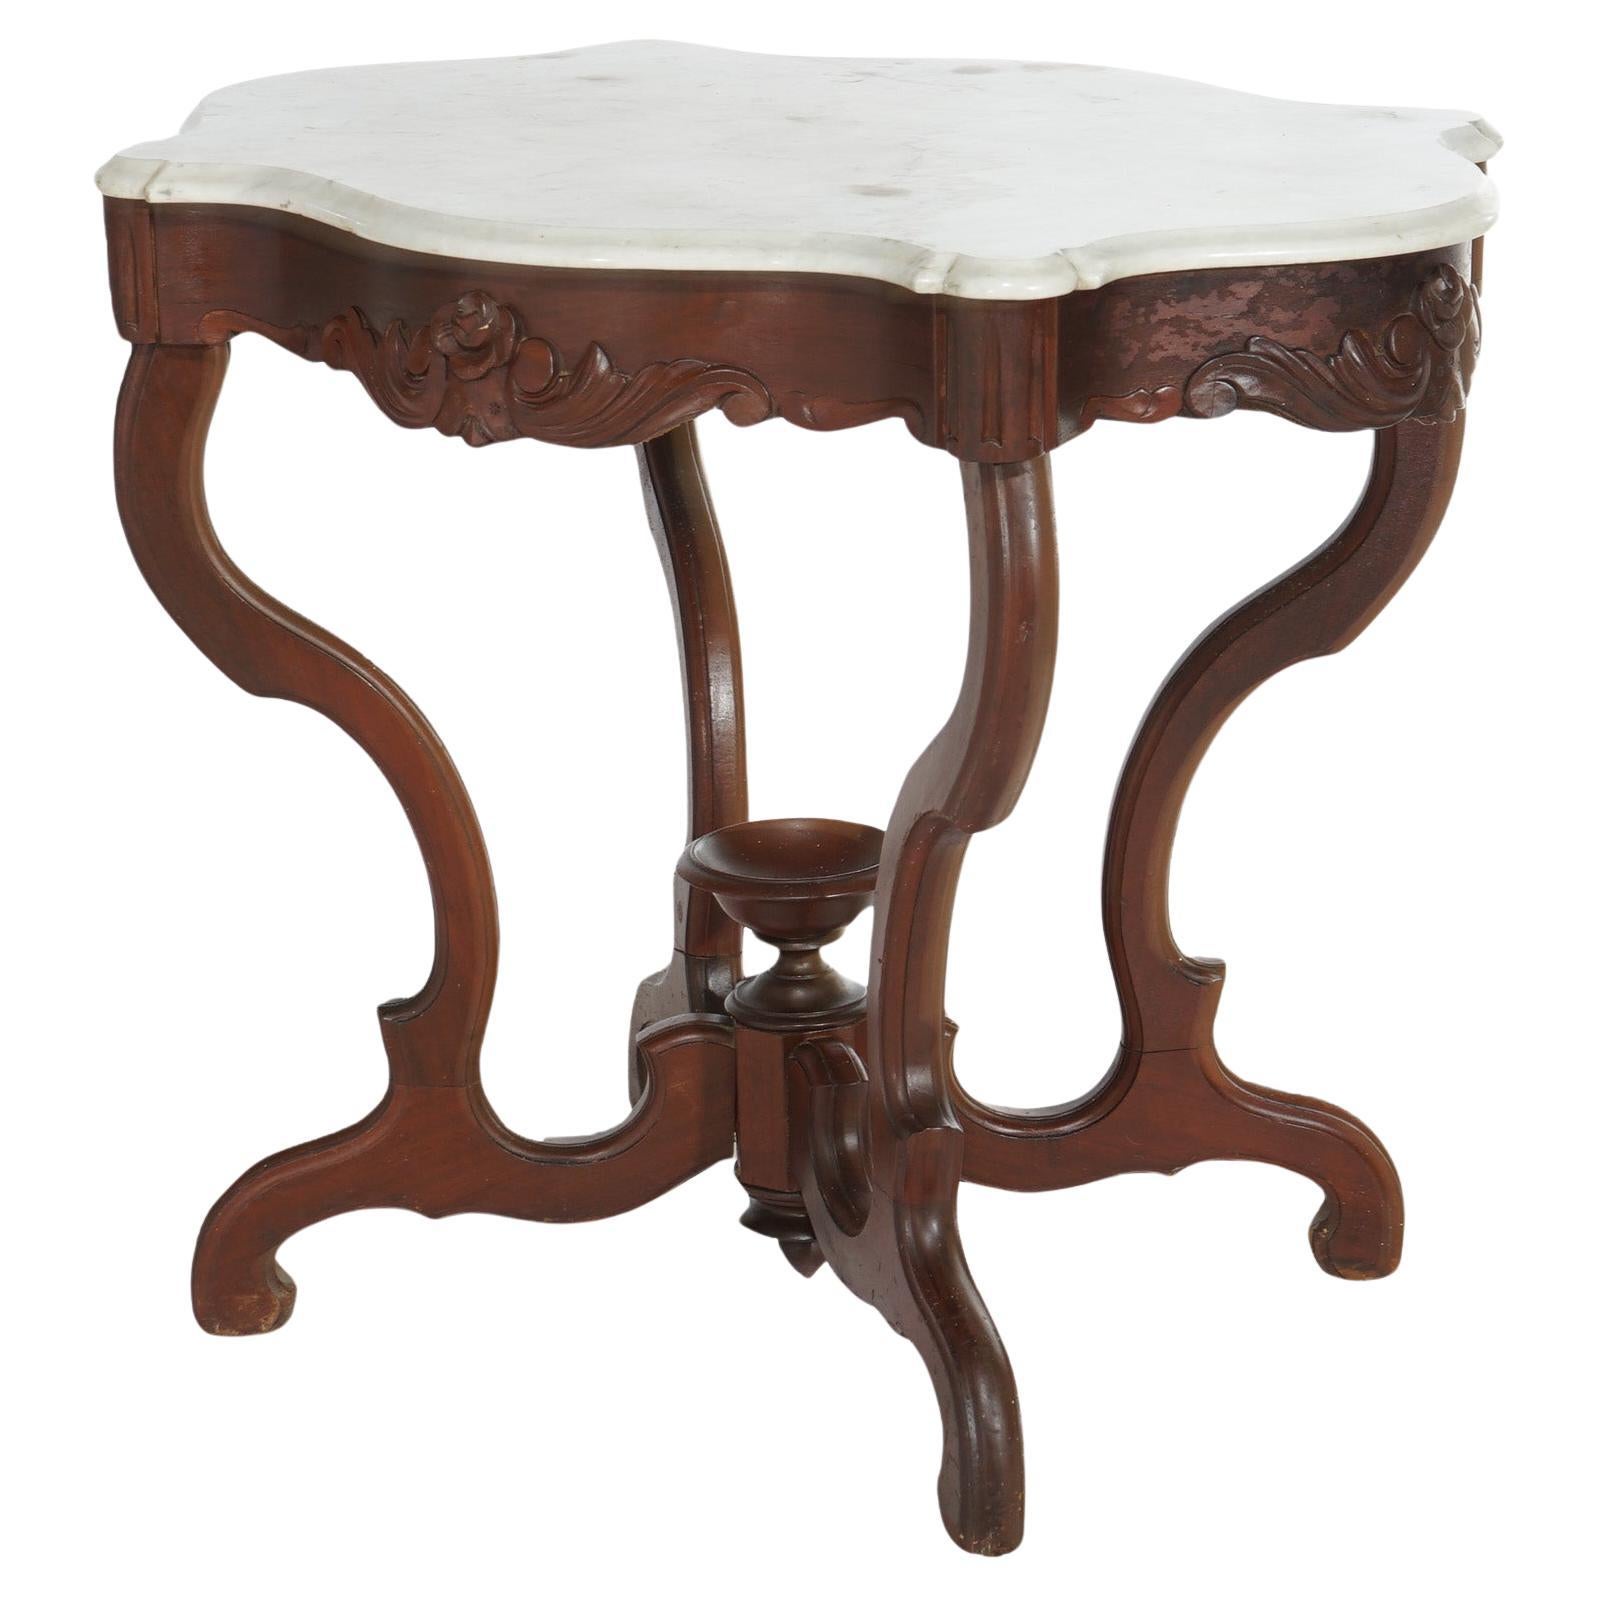 Antique Victorian Turtle Top Marble & Carved Walnut Parlor Table Circa 1890